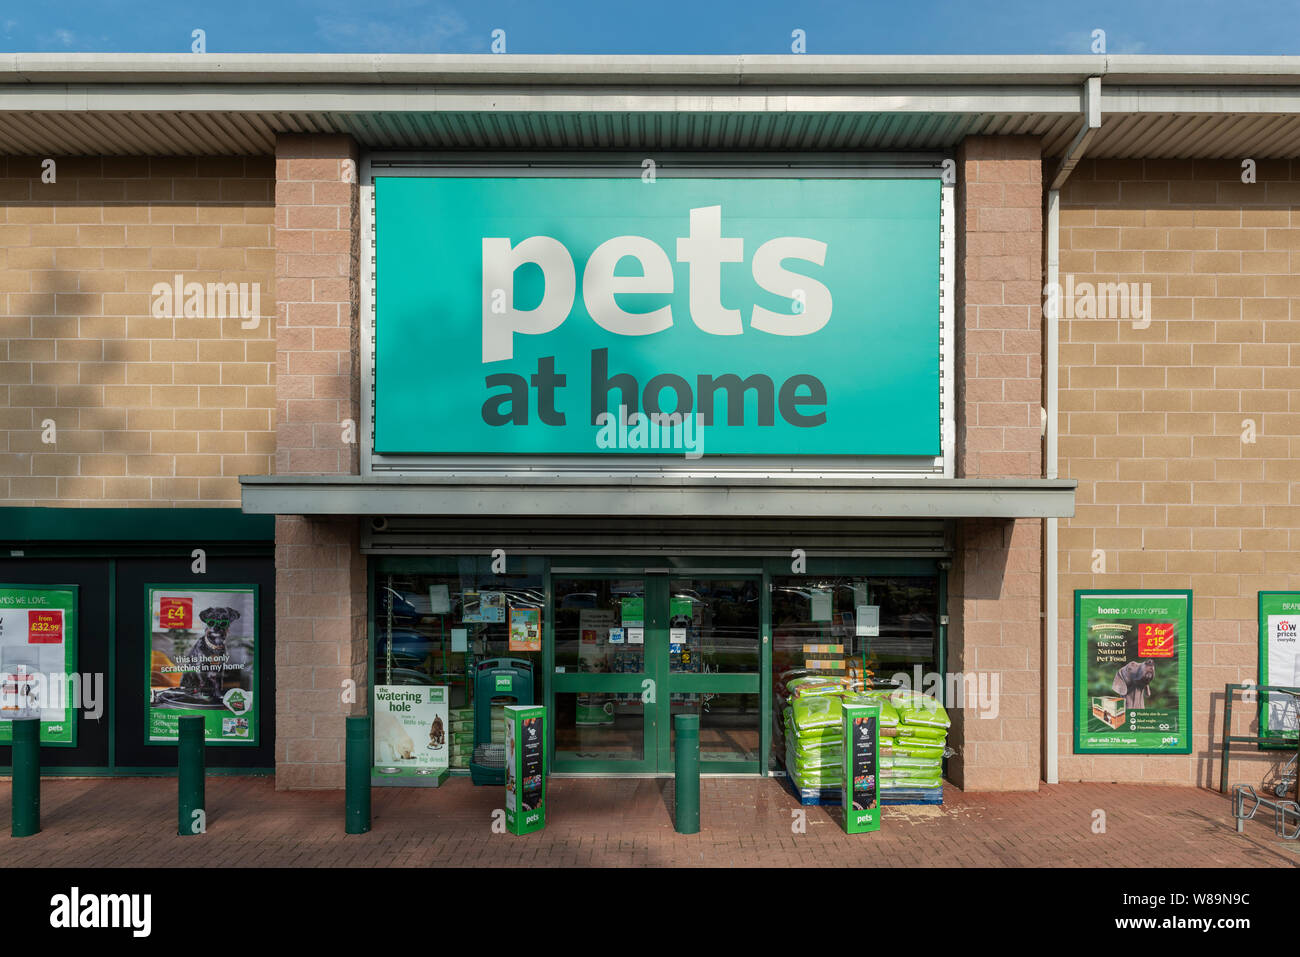 The storefront of the retailer Pets at Home on a retail park in Baguley, Manchester. (Editorial use only). Stock Photo